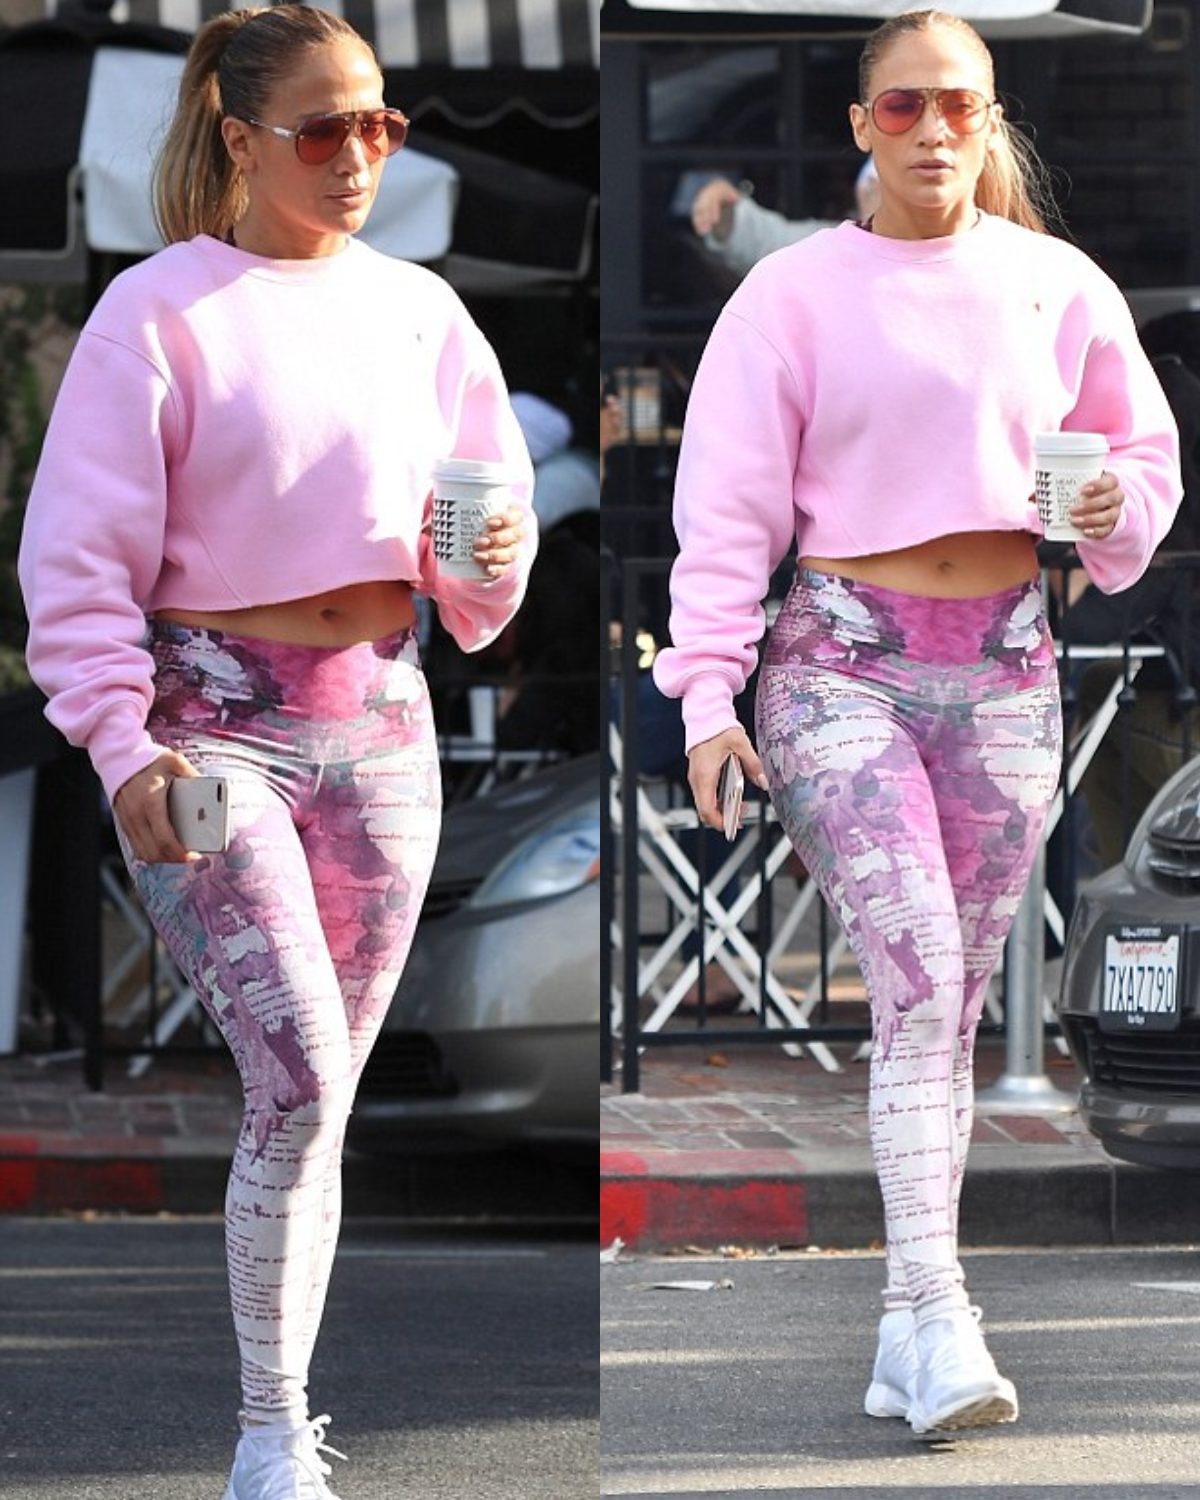 Cover Image for Jennifer Lopez bares her toned tummy in pink cut-off sweatshirt and leggings as she grabs coffee with beau Alex Rodriguez